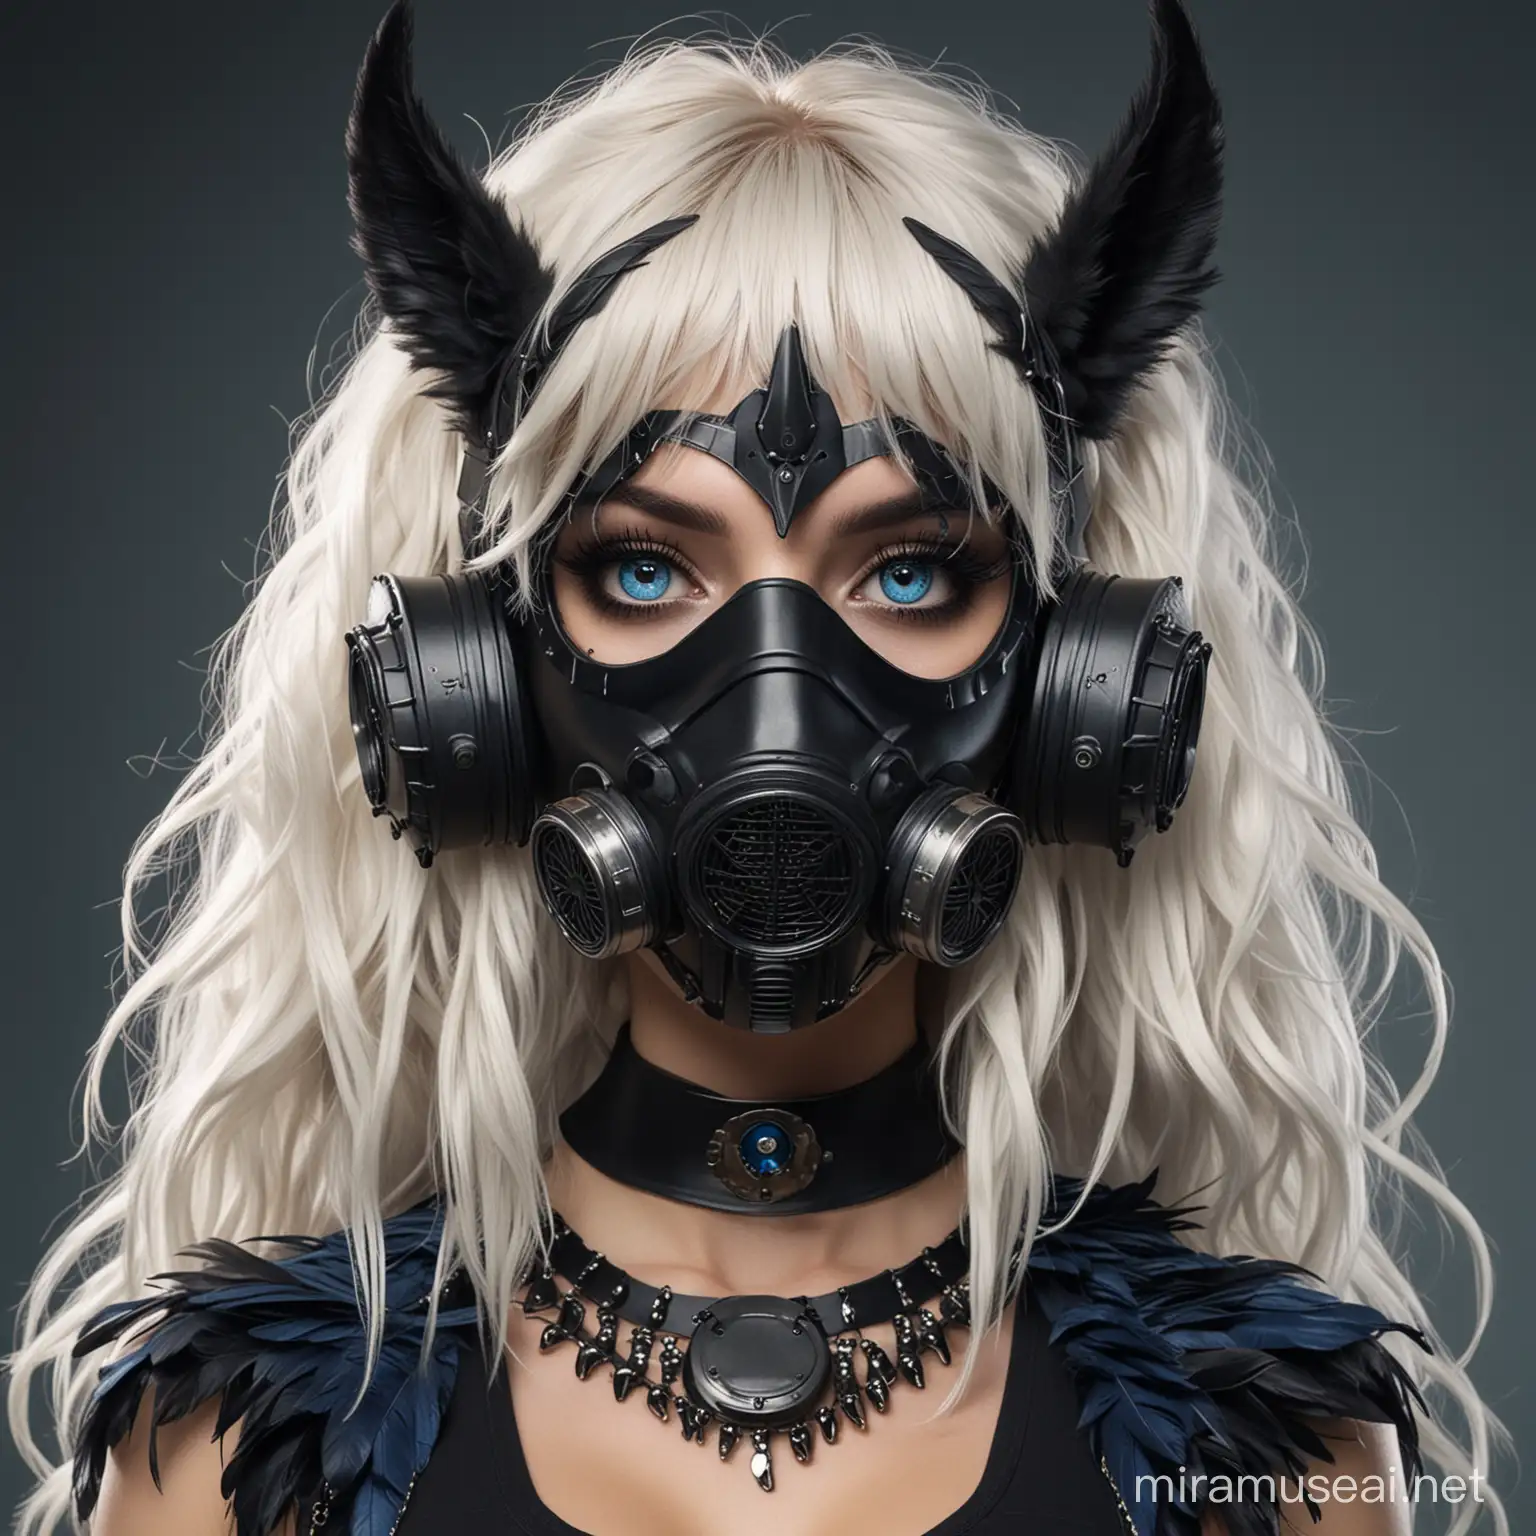 girl with white wavy hair with bangs, black and blue feathers in hair, anubis black ears, wearing black gas mask, huge dark eyes, dj style, postapocalypse